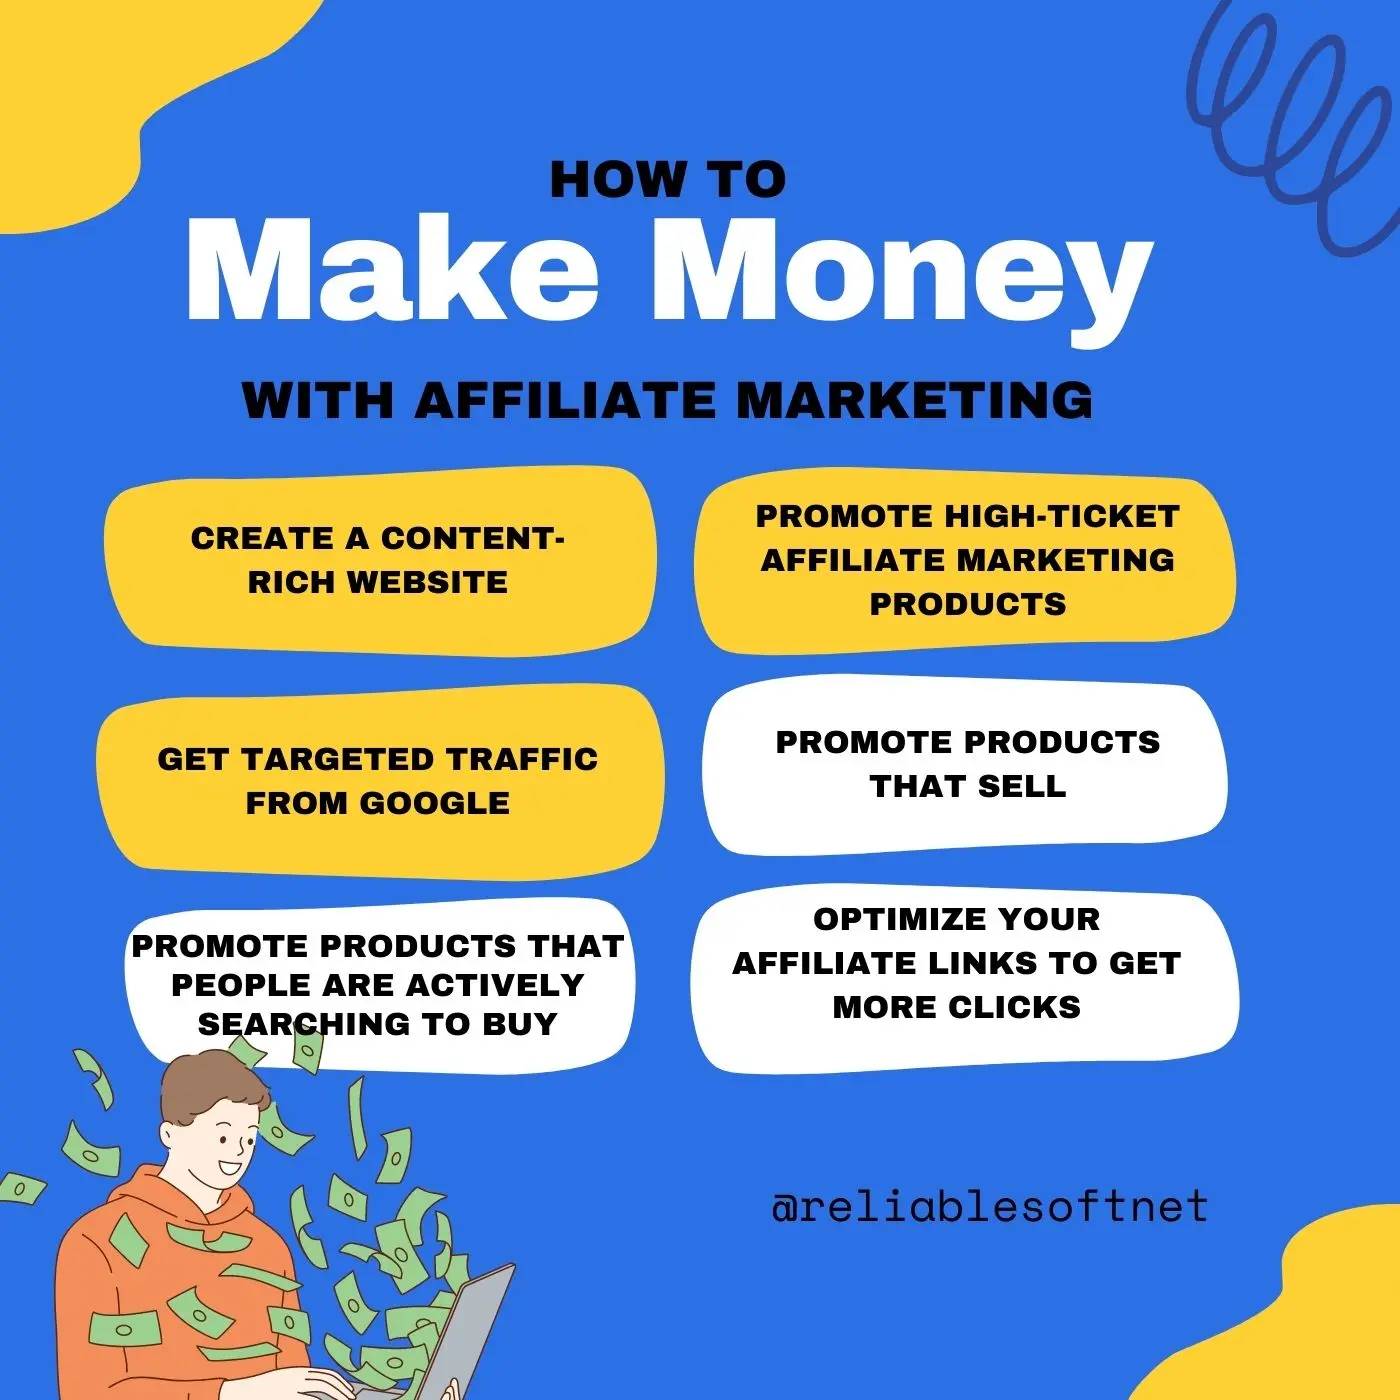 How to Get Started with Affiliate Marketing